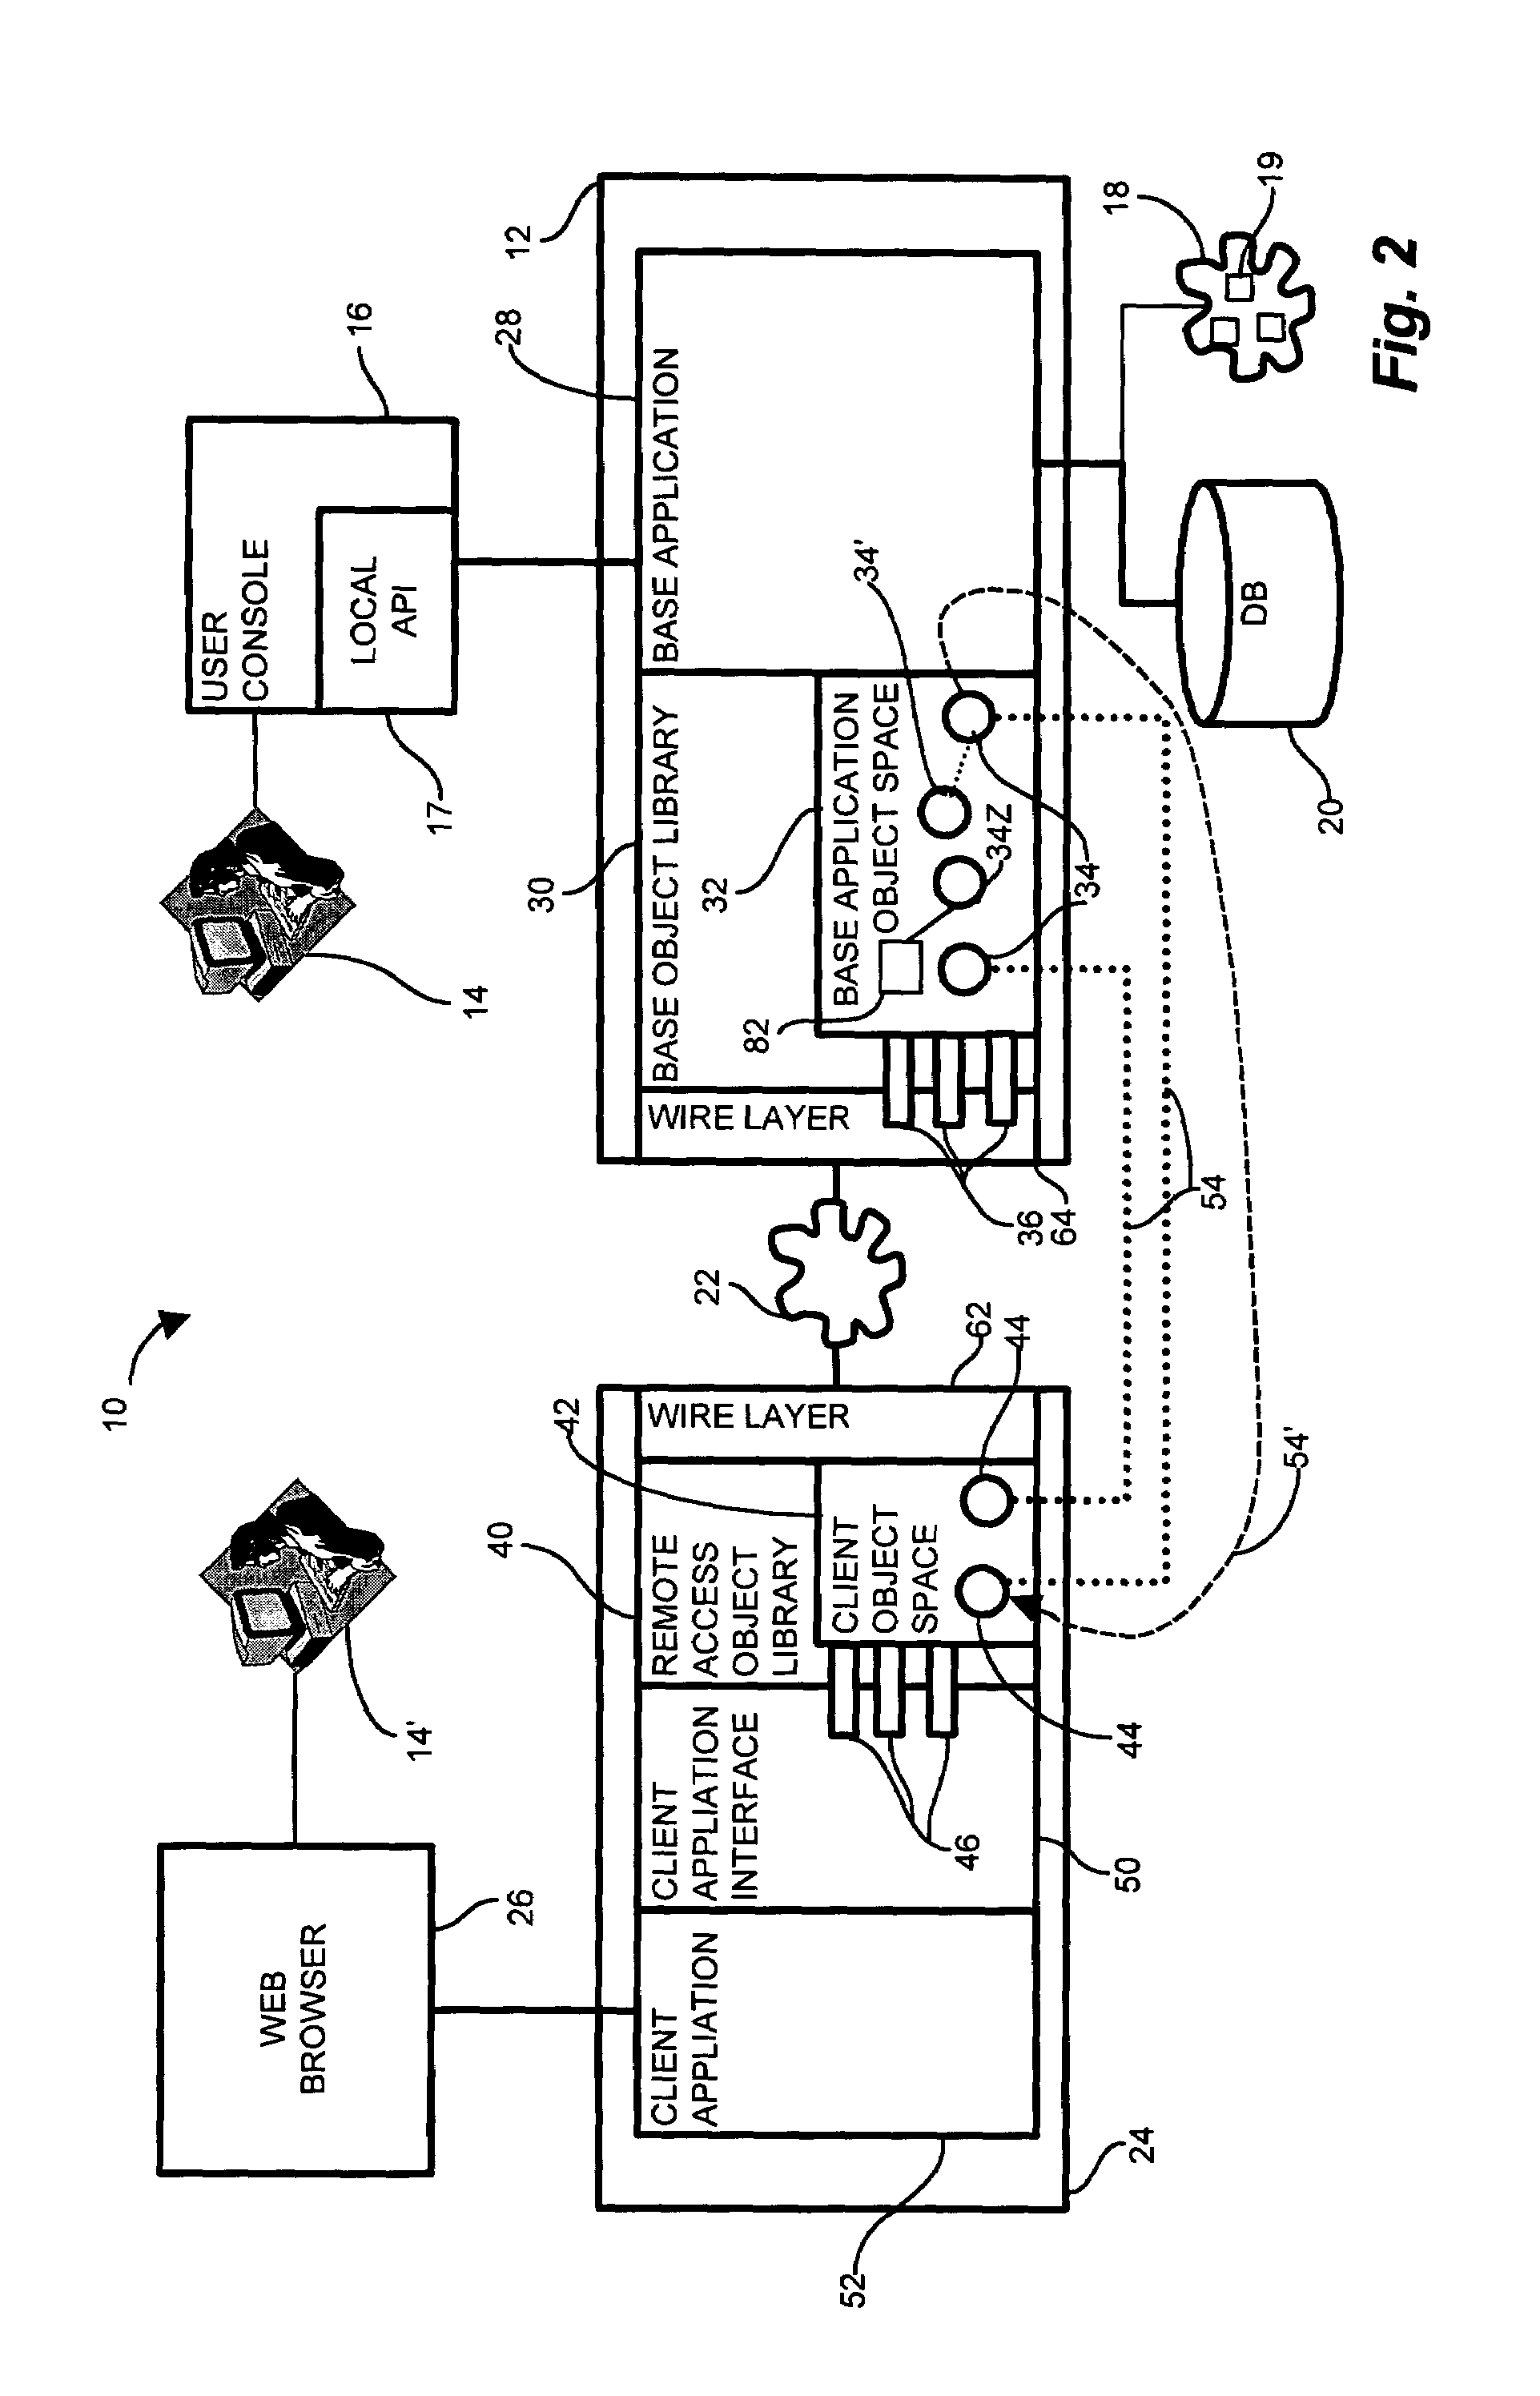 System and methods for deploying and invoking a distributed object model